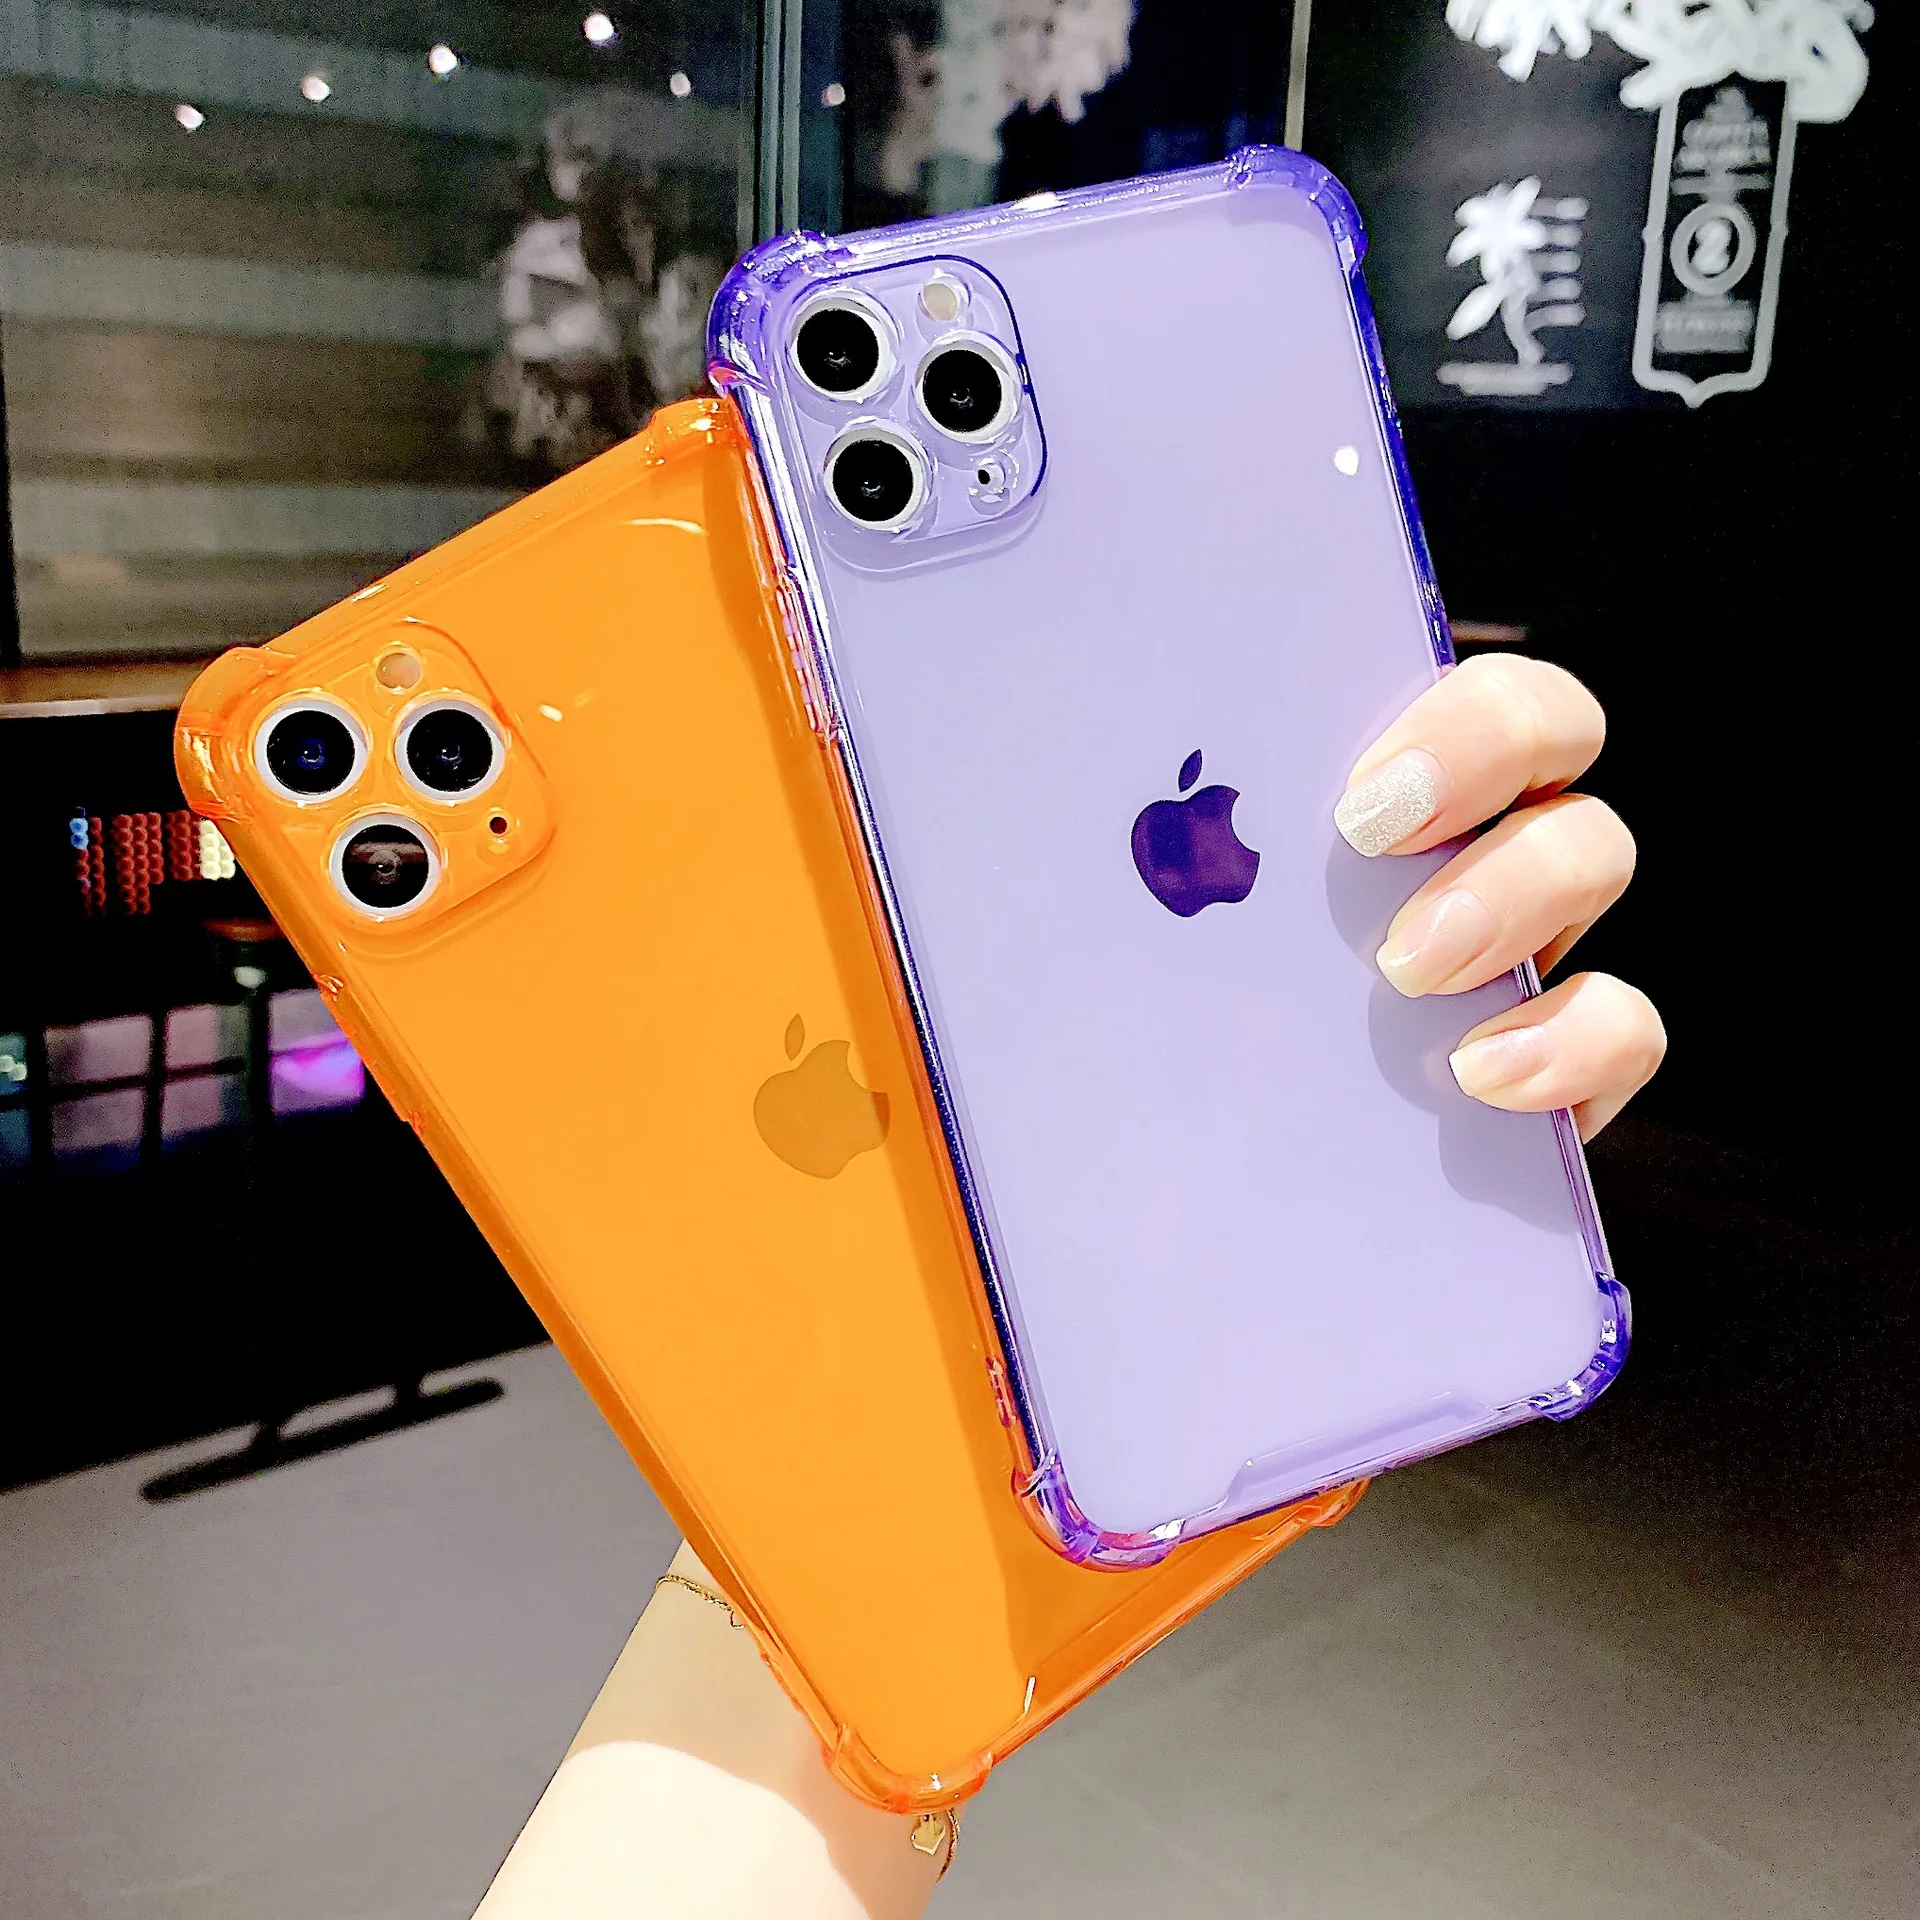 

For iPhone Transparent Case Shockproof,Ebay Hot Flourescent Neon Blue Phone Case for iPhone 12 11 Pro Max Mini Xr Xs Max Hulle, Clear,mint,purple,orange,neon,hot pink